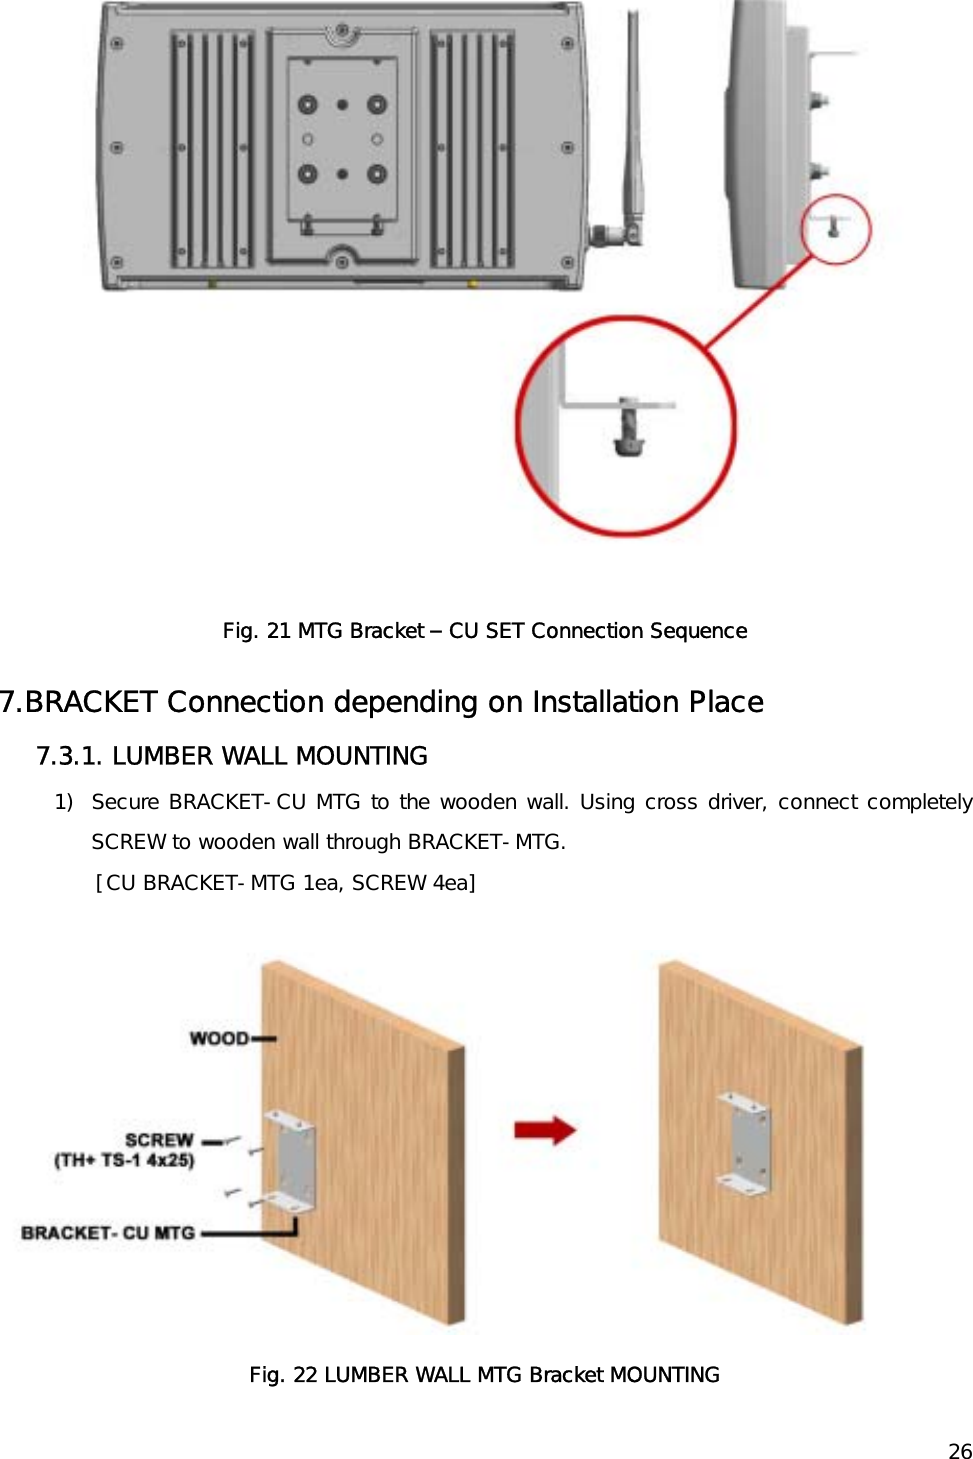   26  Fig. 21 MTG Bracket – CU SET Connection Sequence 7.BRACKET Connection depending on Installation Place   7.3.1. LUMBER WALL MOUNTING 1)  Secure BRACKET-CU MTG to the wooden wall. Using cross driver, connect completely SCREW to wooden wall through BRACKET-MTG. [CU BRACKET-MTG 1ea, SCREW 4ea]                 Fig. 22 LUMBER WALL MTG Bracket MOUNTING 